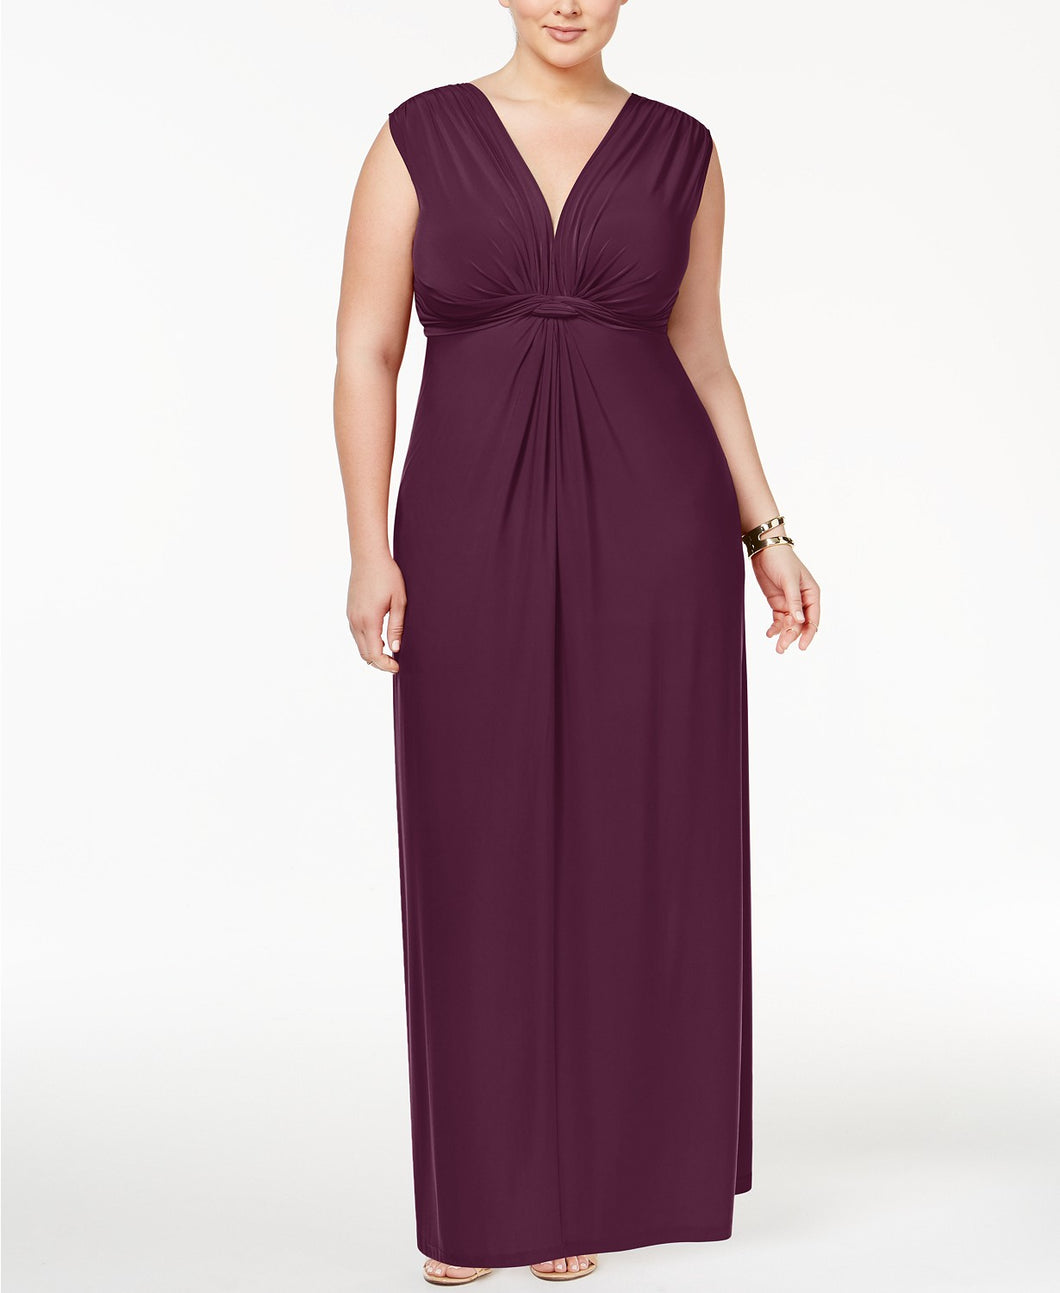 Love Squared Trendy Plus Size Sleeveless Knotted Maxi Dress 1X